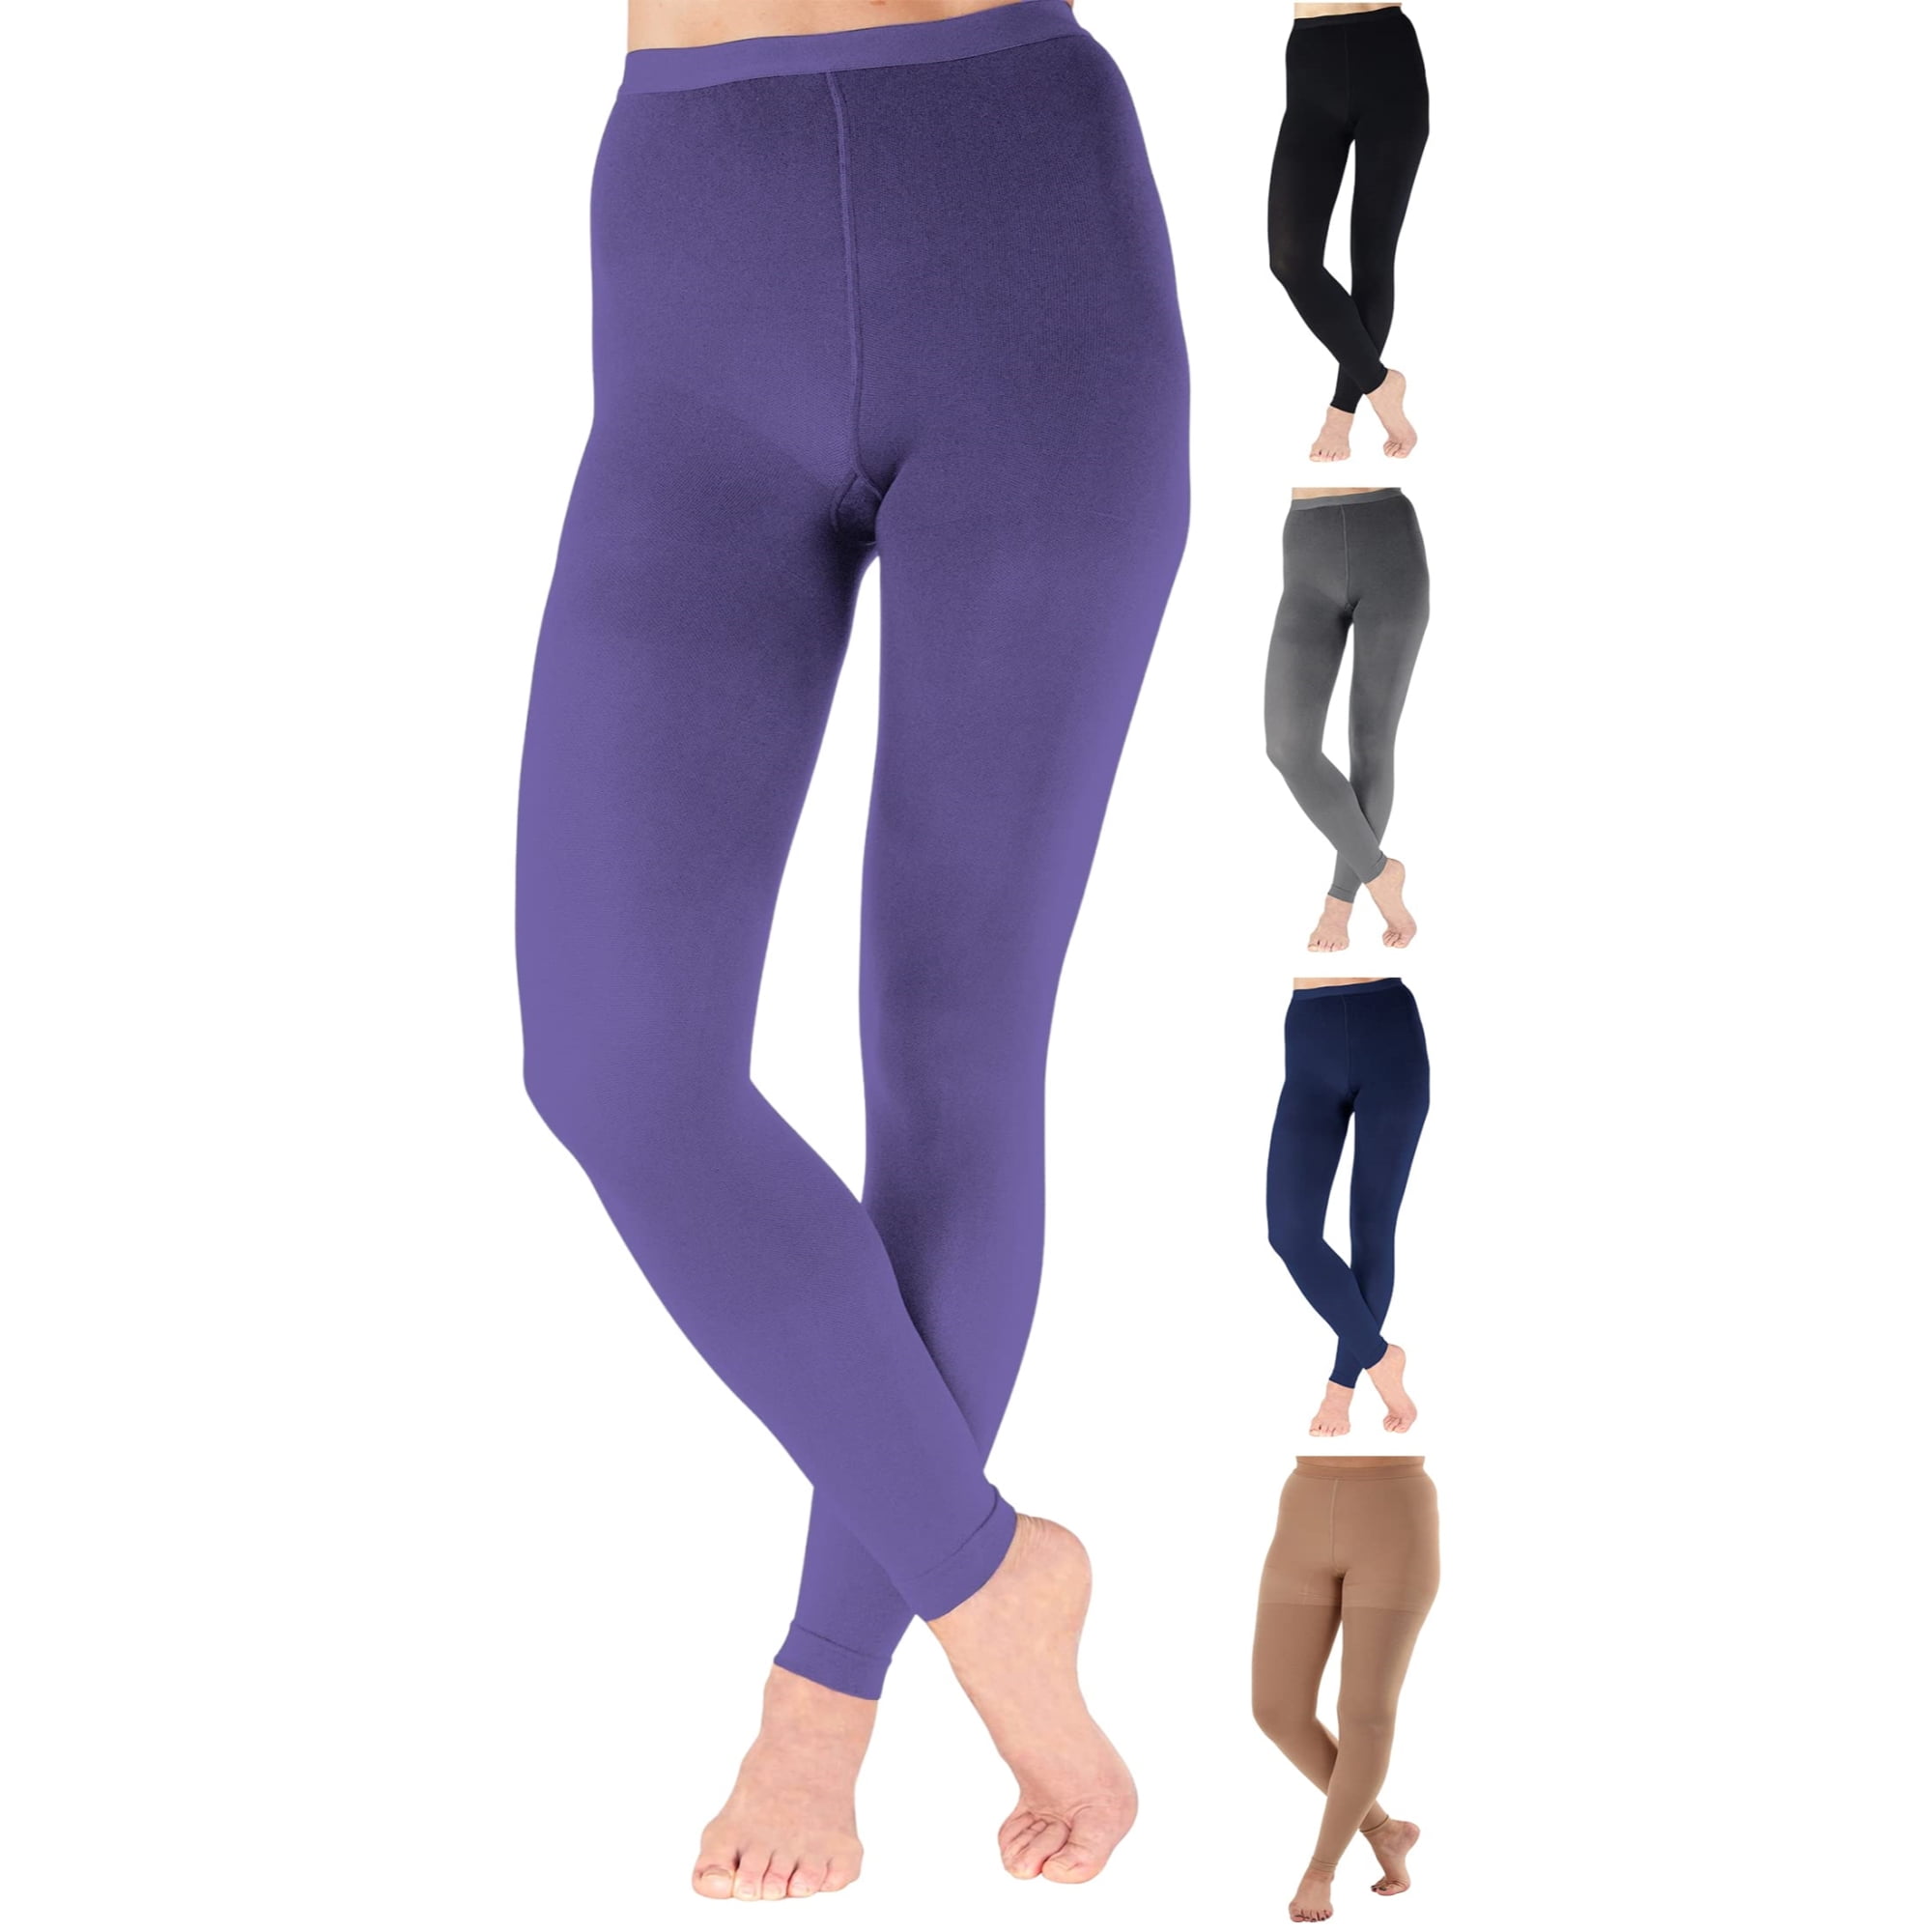  Plus Size Compression Tights for Women Circulation 20-30mmHg -  Graduated Support Stockings with Open Toe for Varicose Veins, Arthritis,  Edema, Embolism - Purple, 4X-Large - A214PR7 : Health & Household